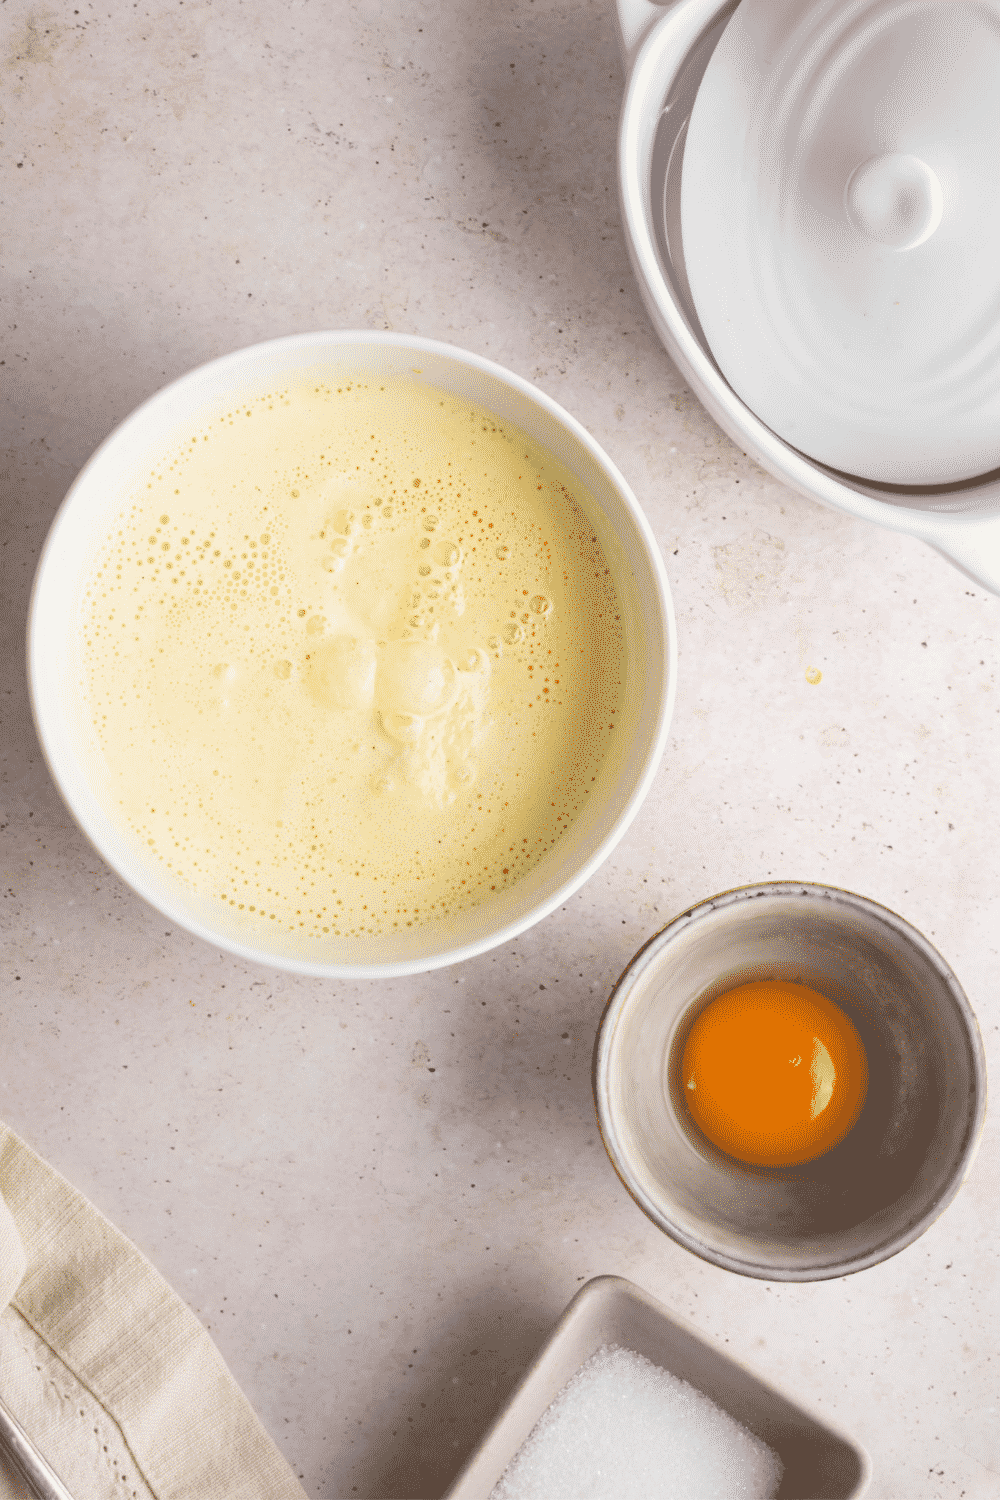 A bowl of melted ice cream and a bowl of an egg yolk on a white counter.